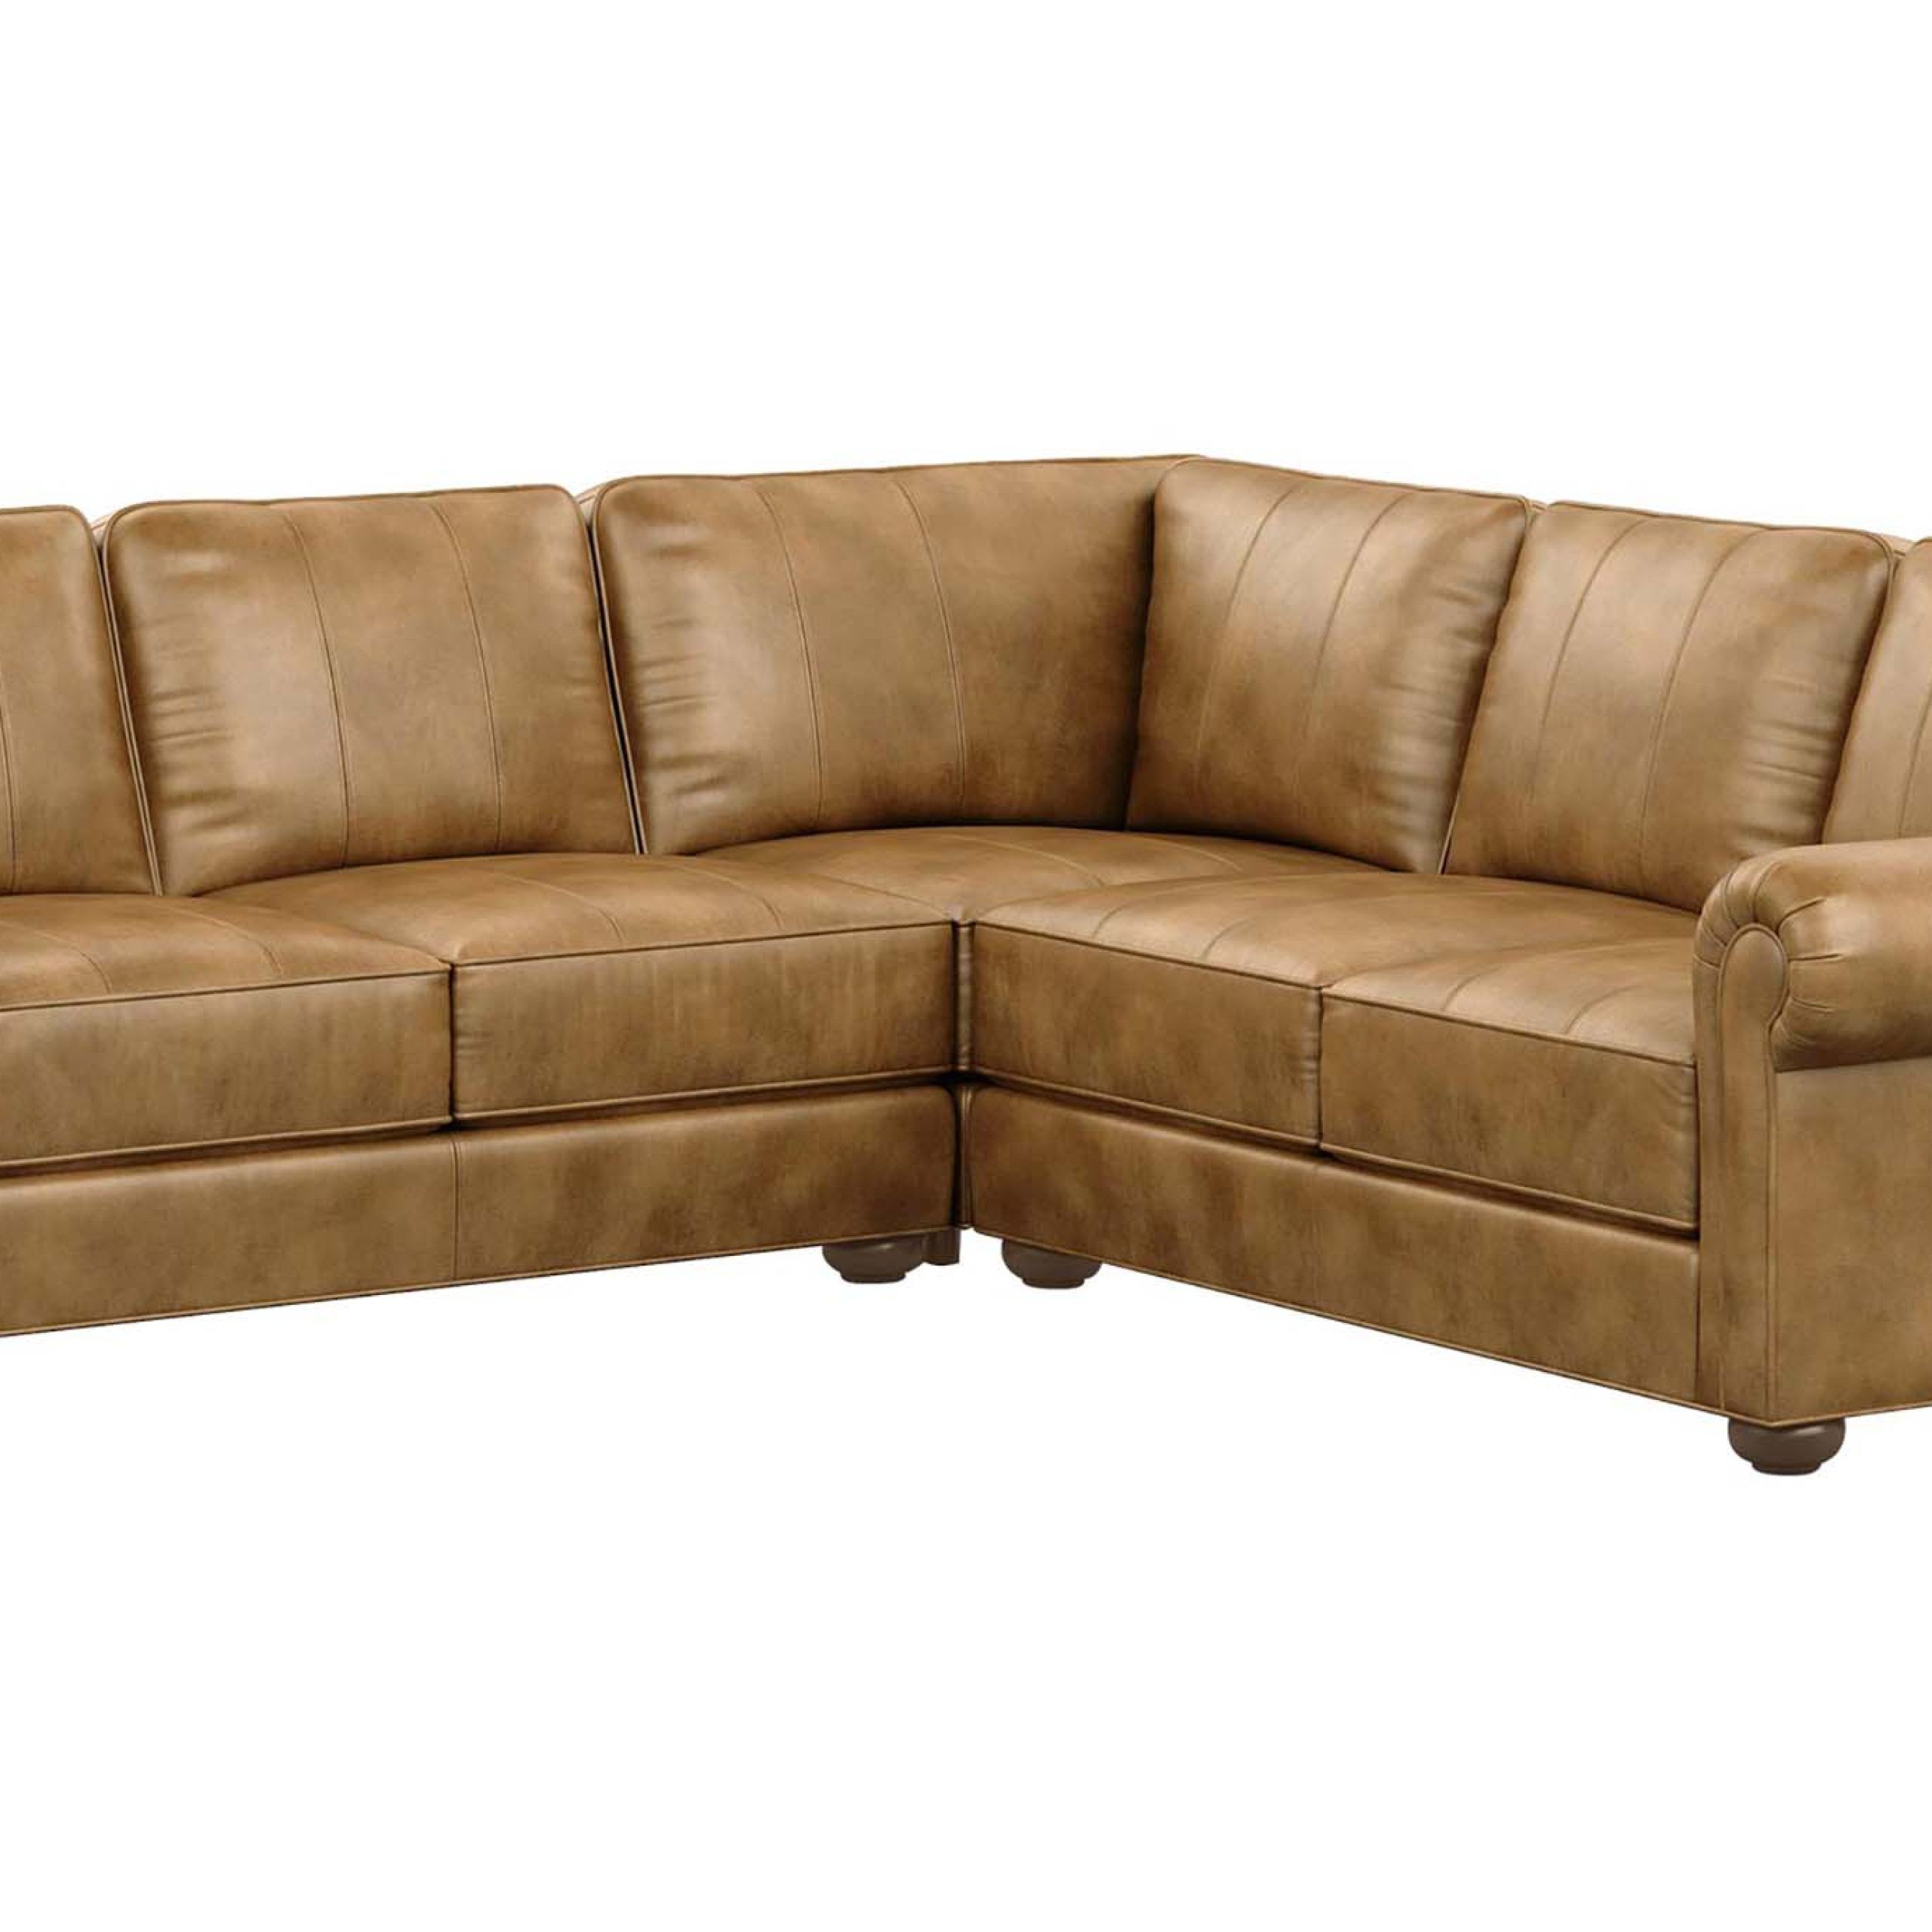 Richmond Three Piece Leather Sectional | Ethan Allen Throughout 3 Piece Leather Sectional Sofa Sets (View 11 of 20)